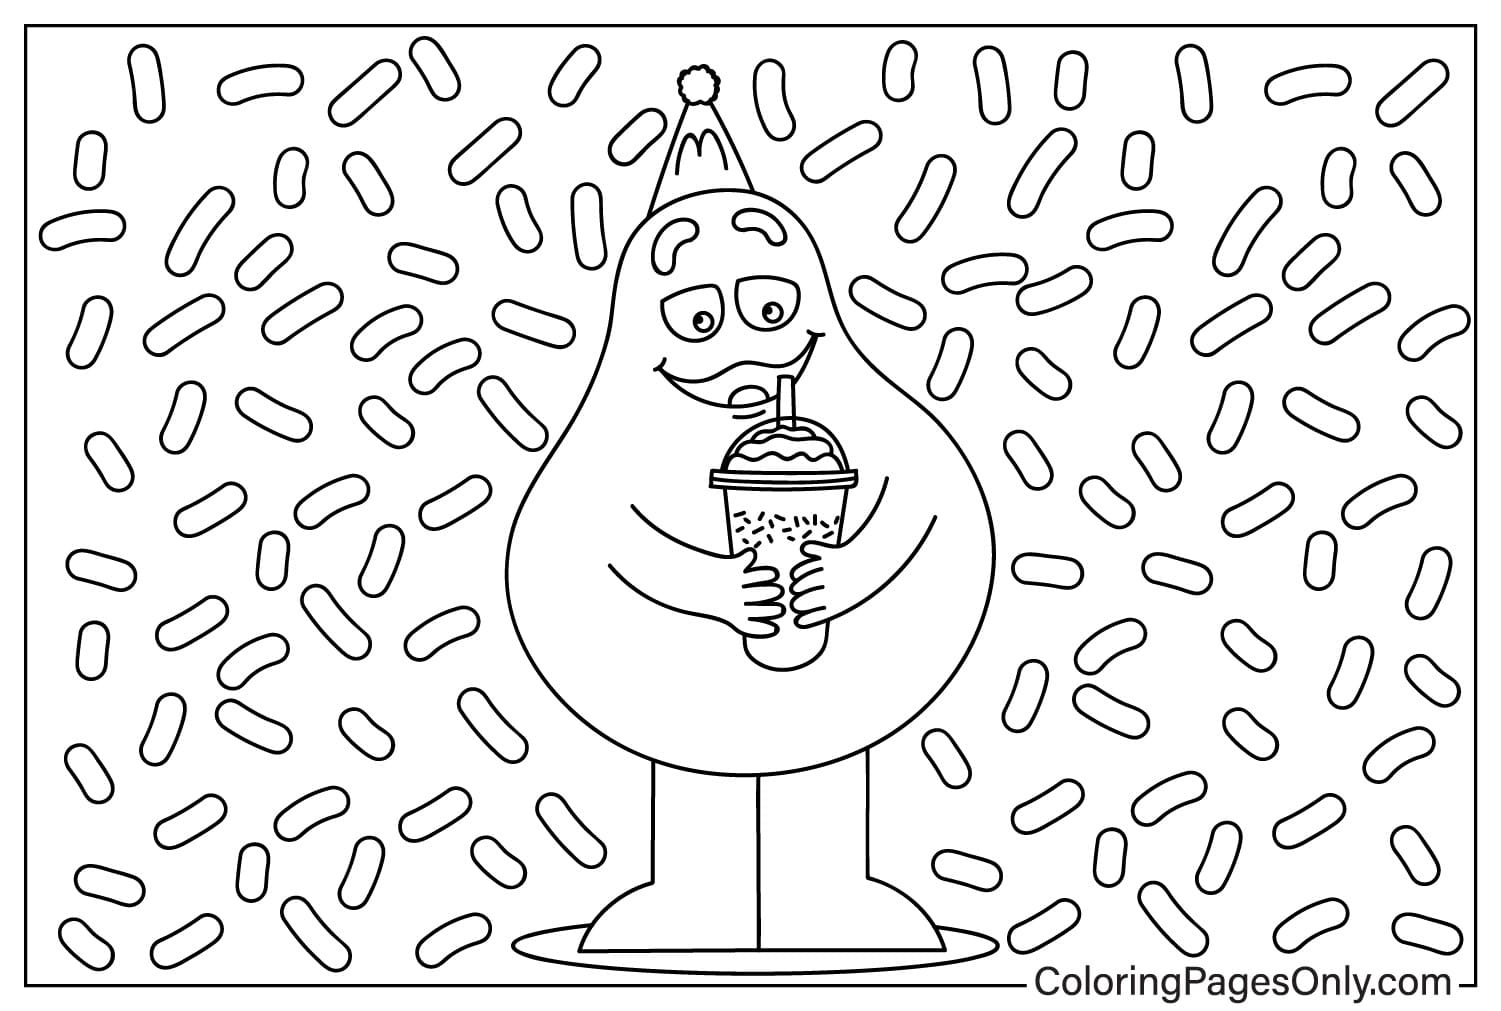 McDonald’s Grimace Fast Food Coloring Sheet from Grimace